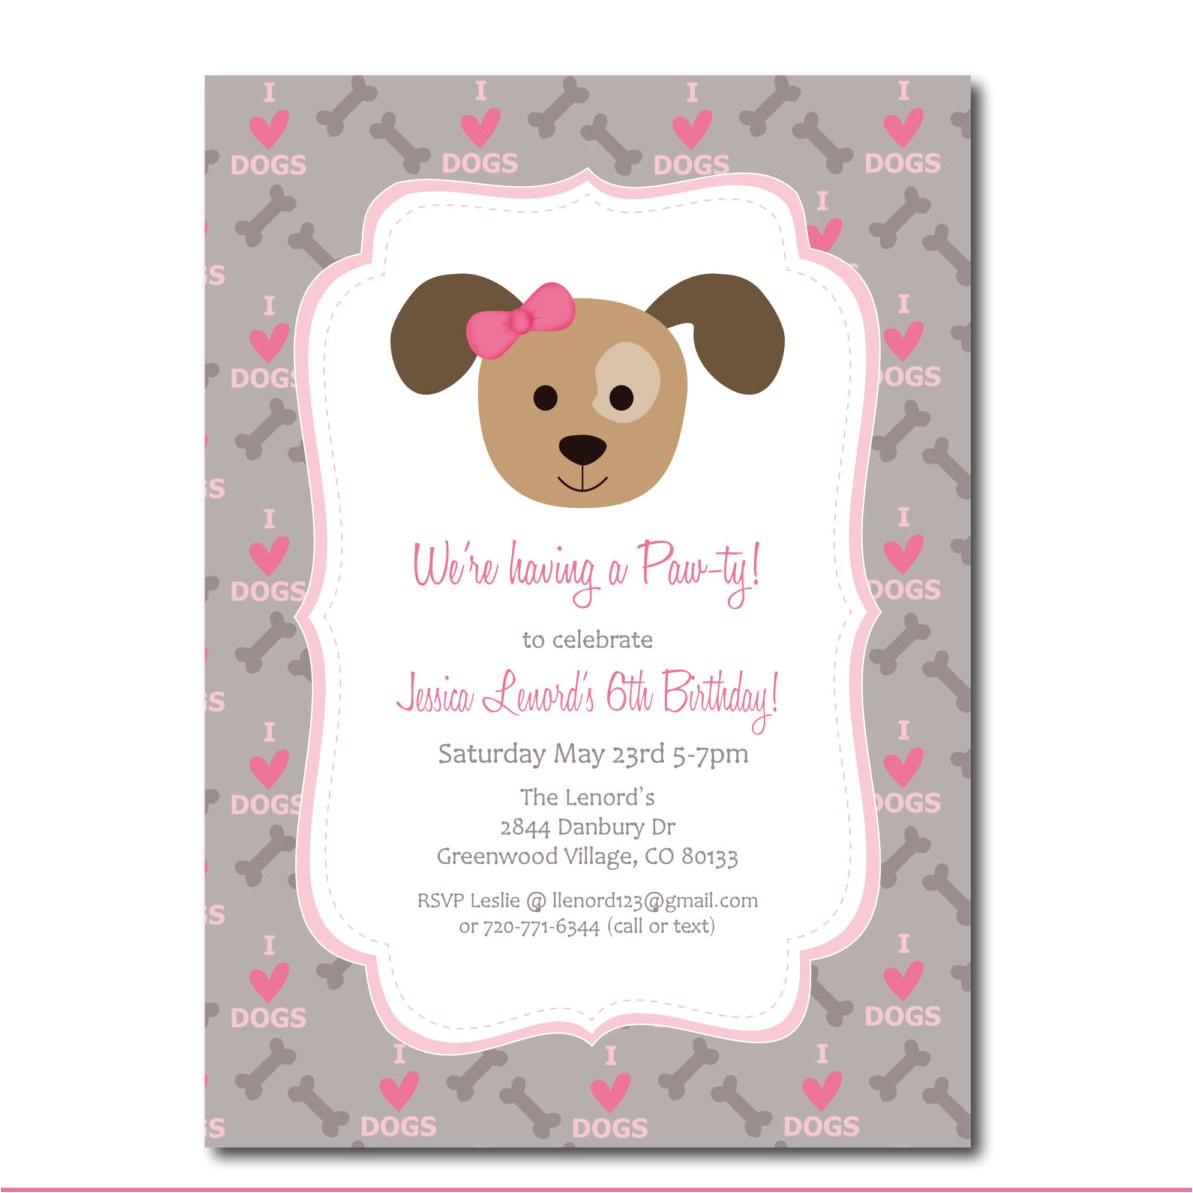 Free Printable Puppy Birthday Invitations Puppy Party Invitation with Editable Text Dog Party